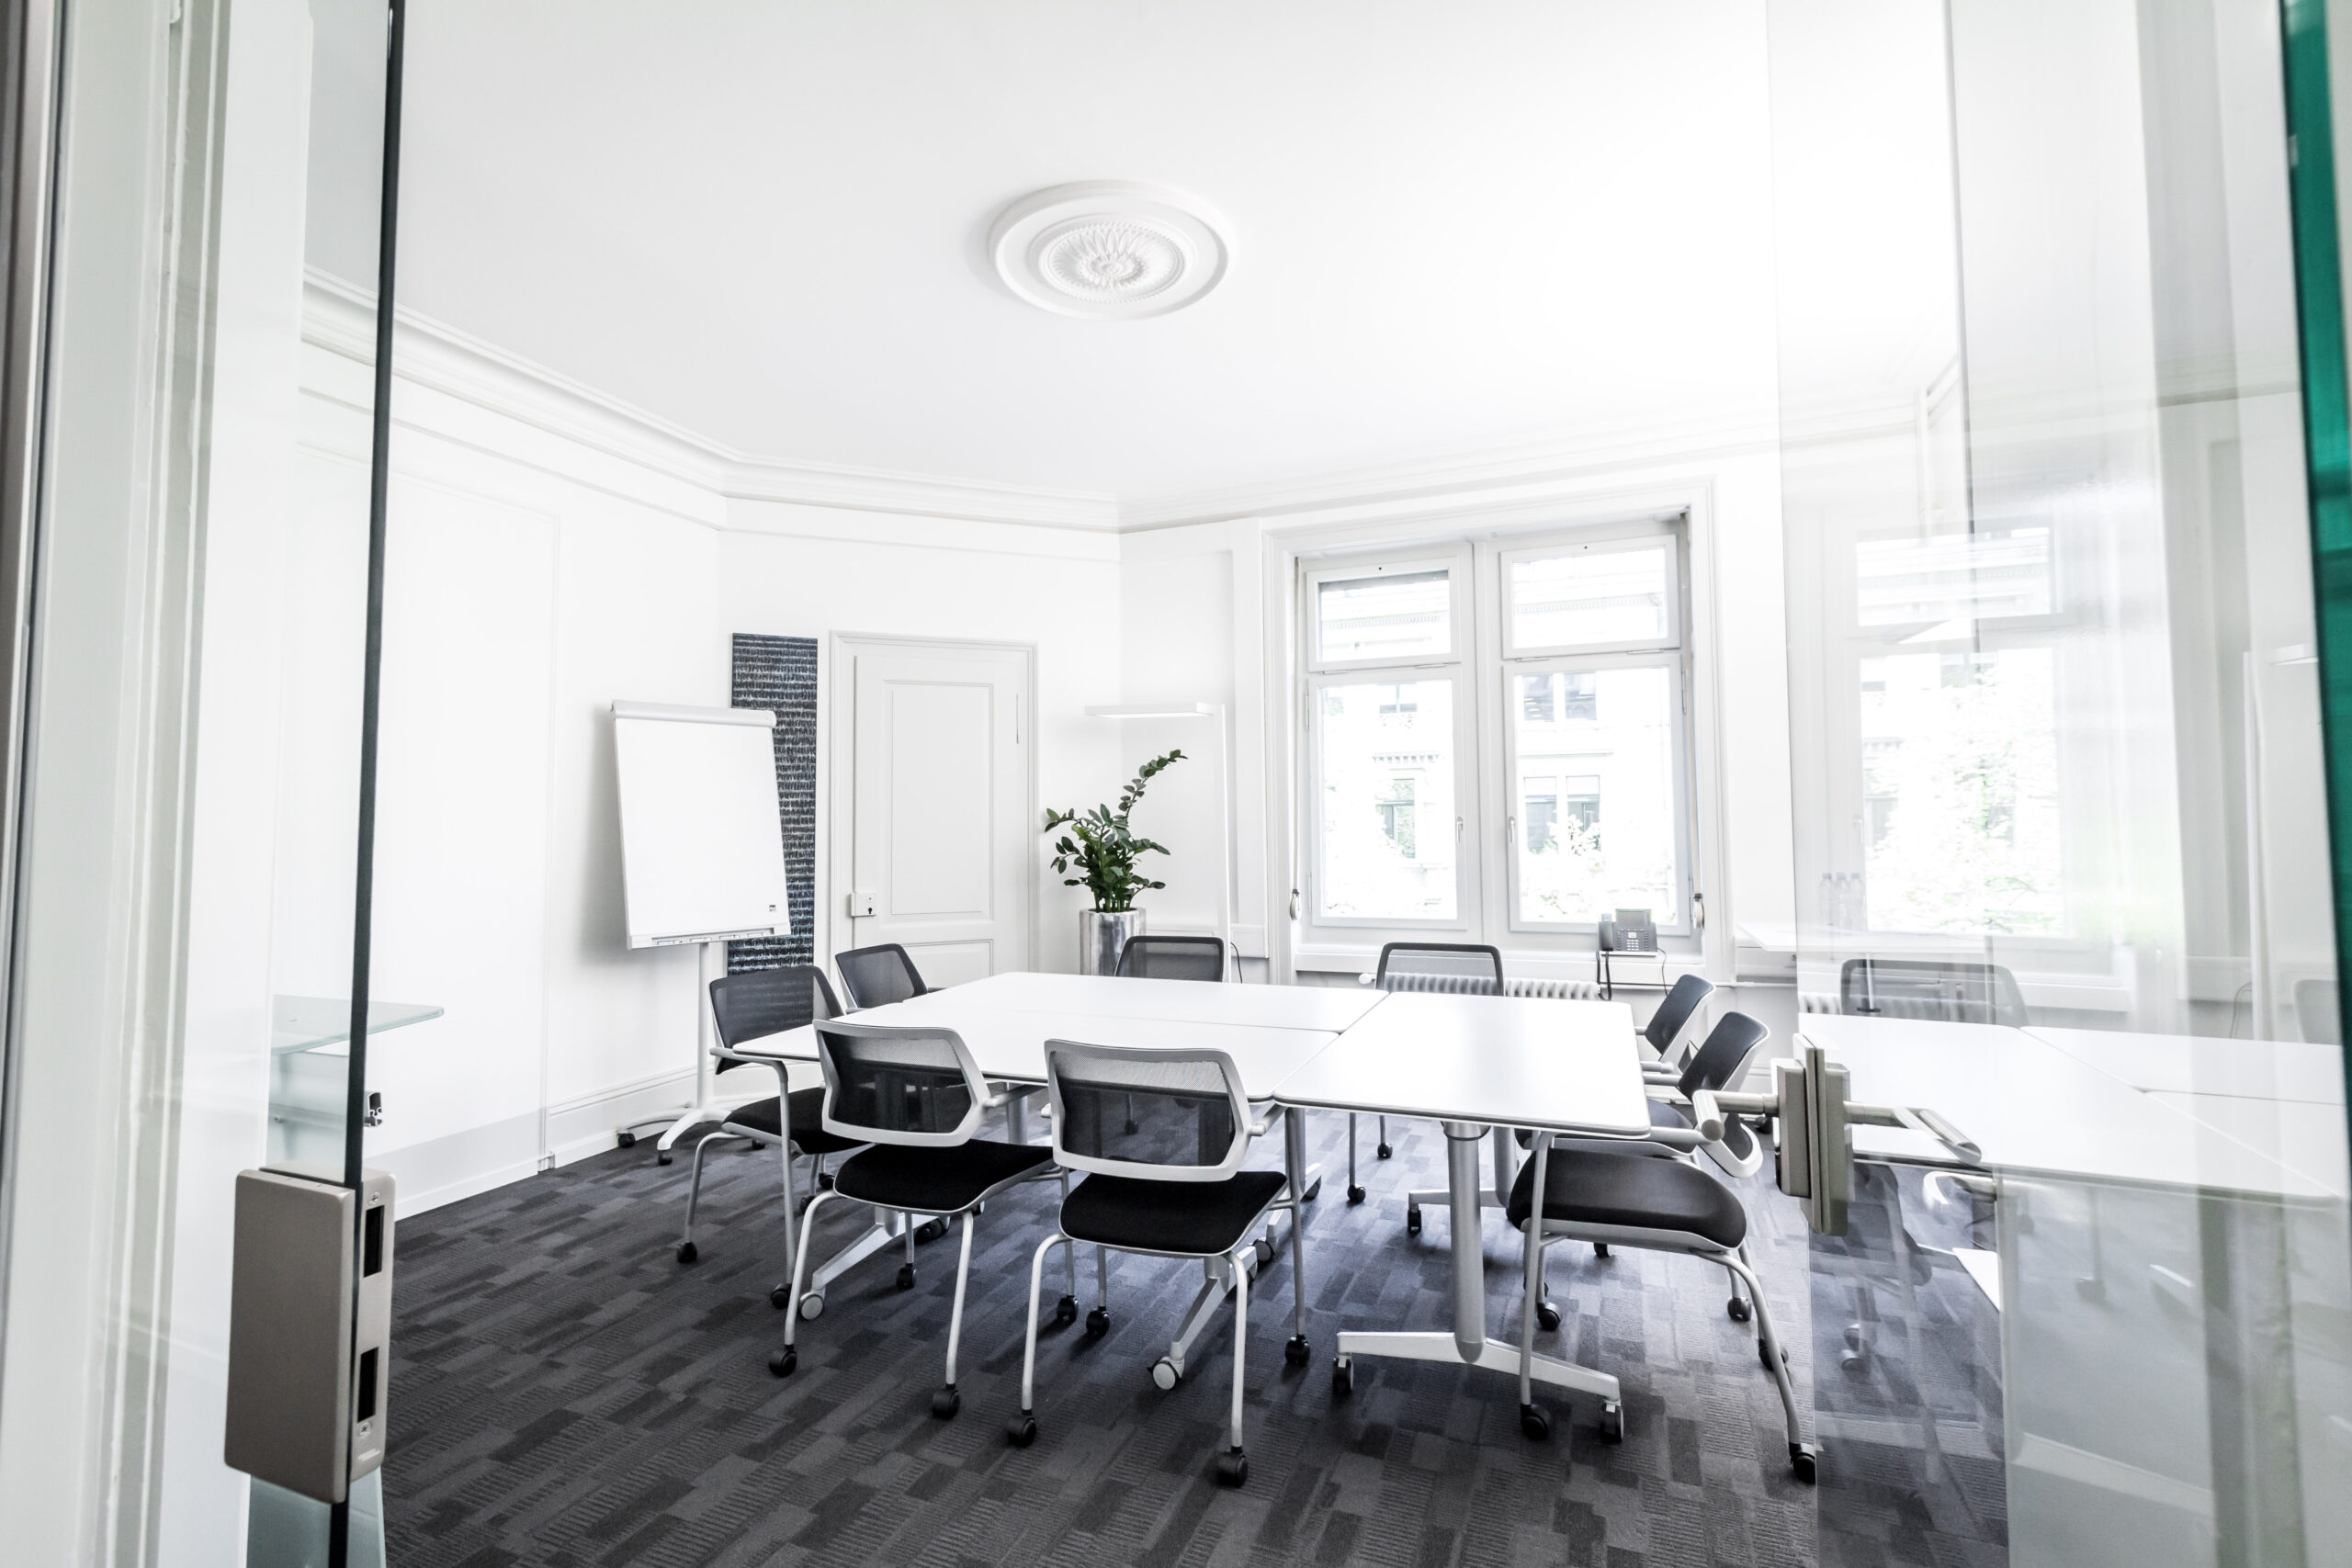 Bright meeting room with high ceilings